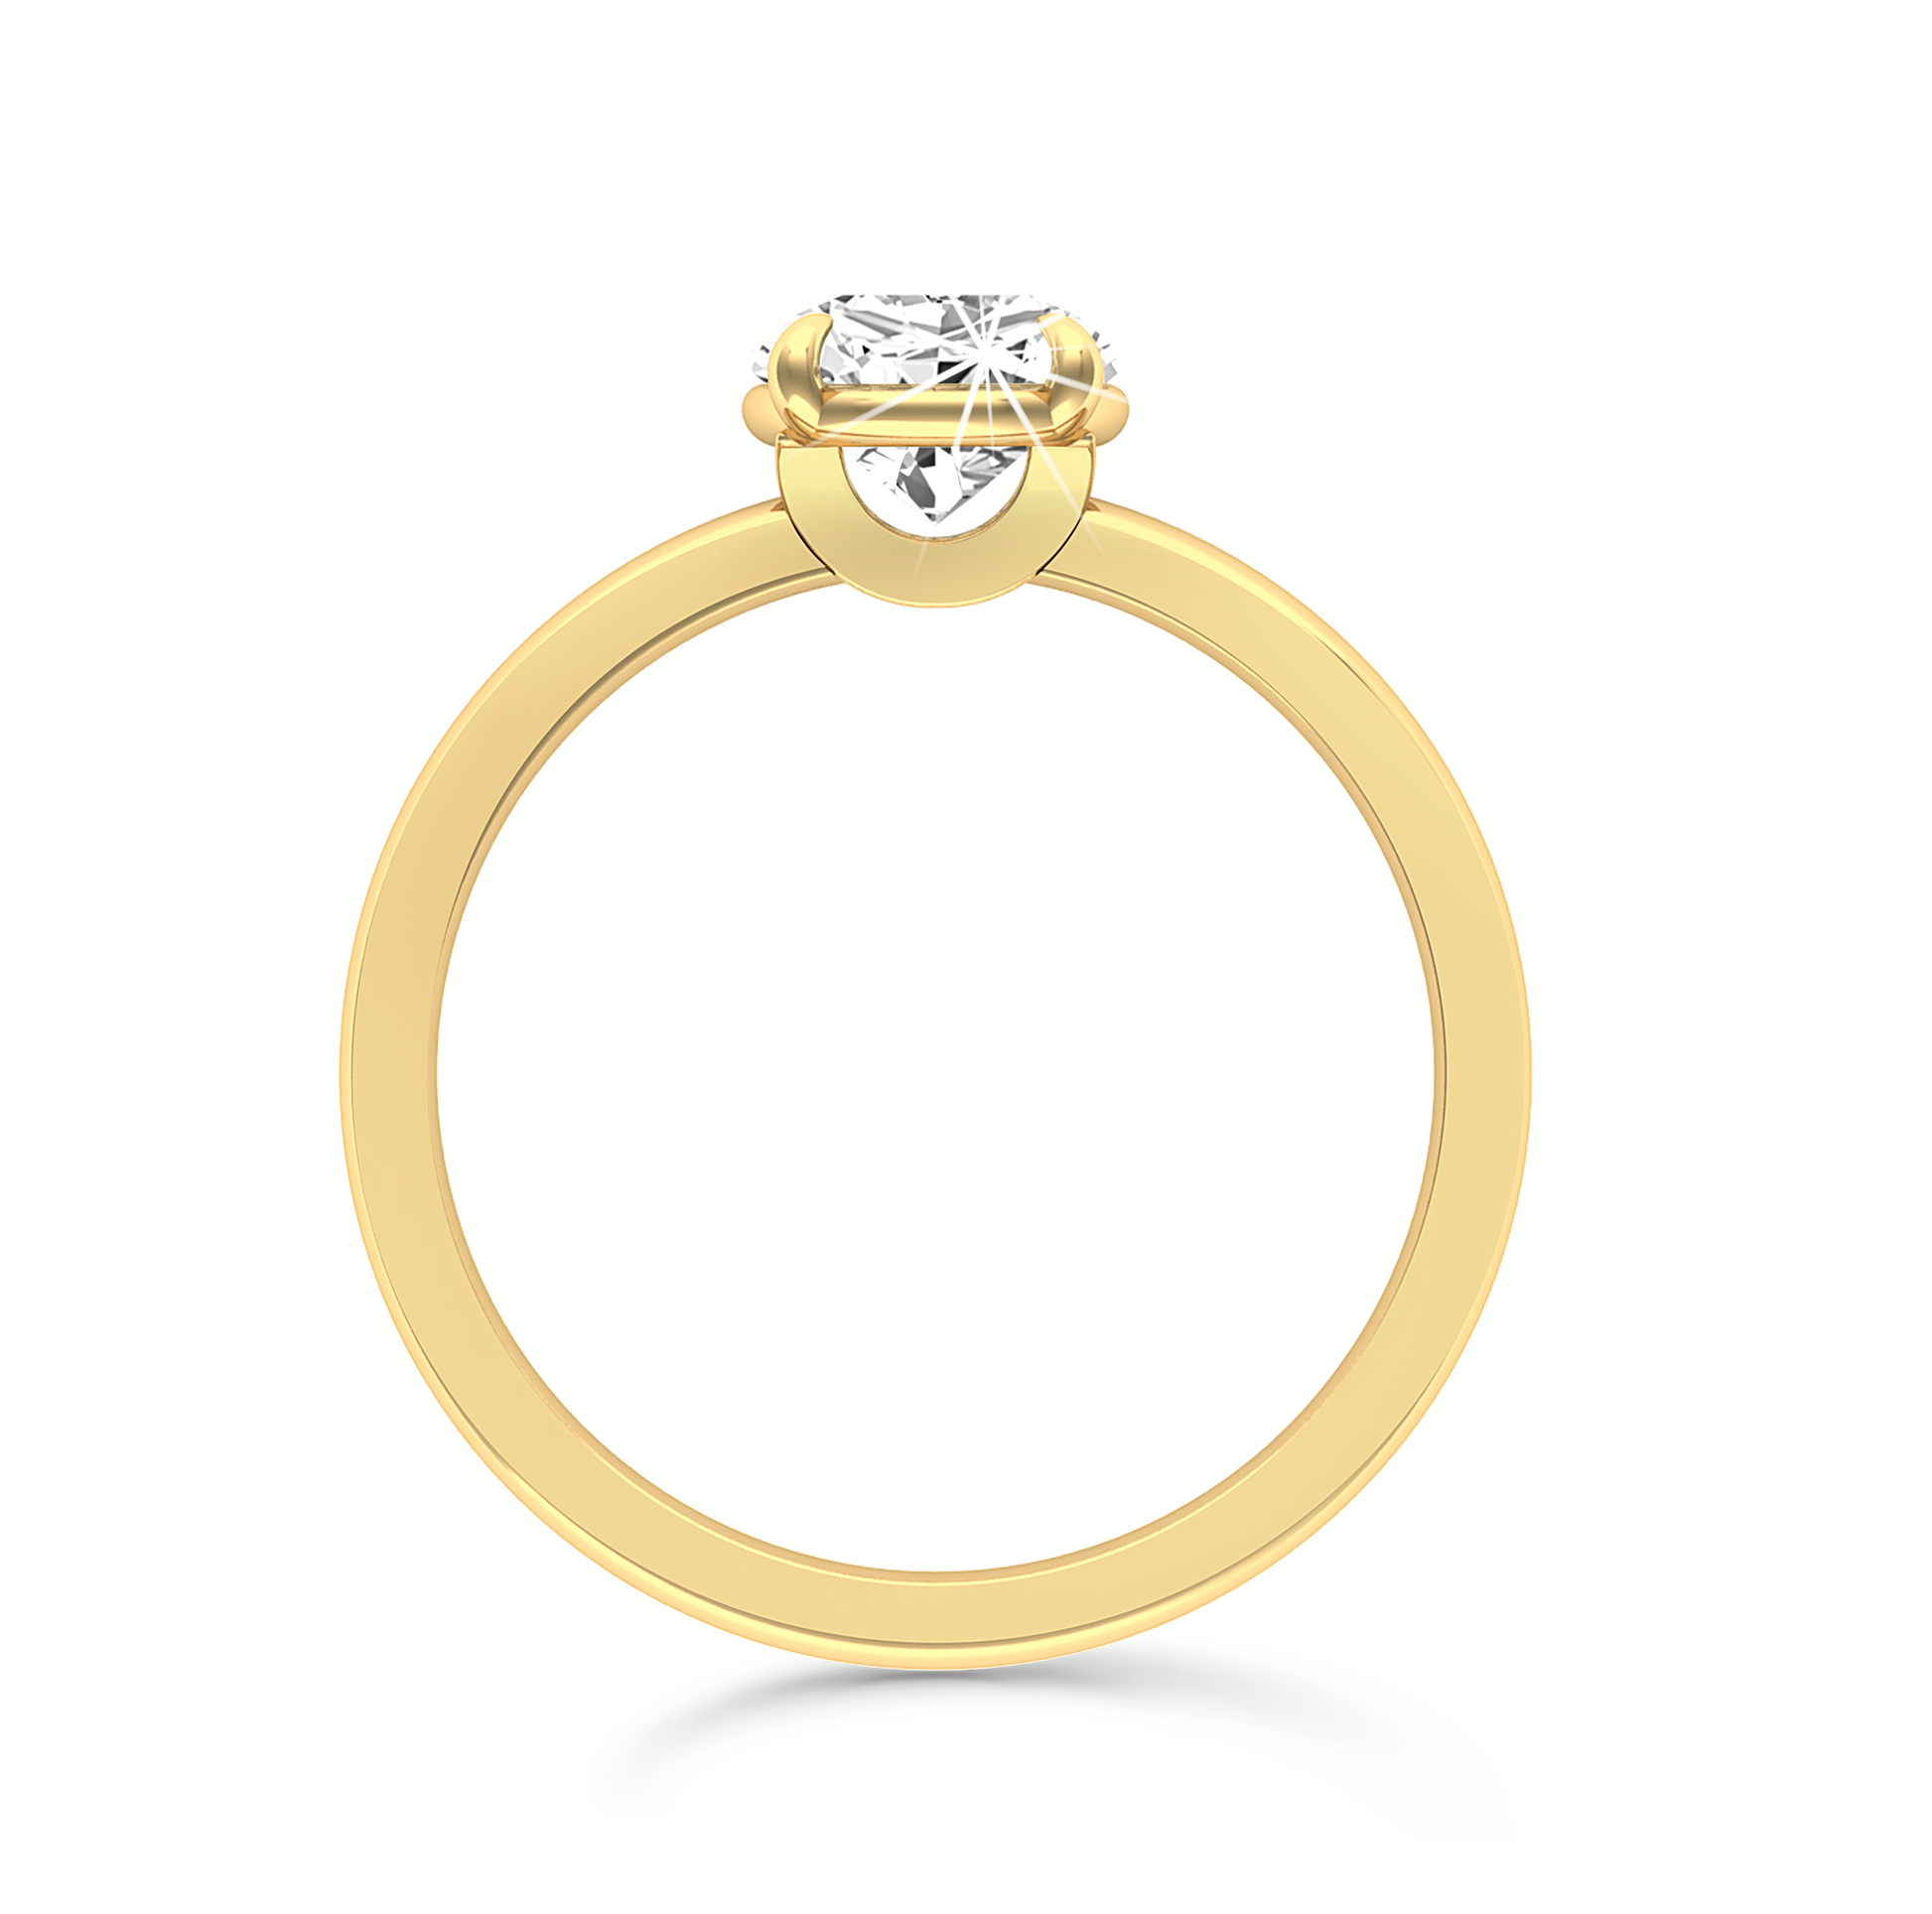 Round Brilliant Cut Solitaire Ring in flush setting - Yellow Gold - Bodega